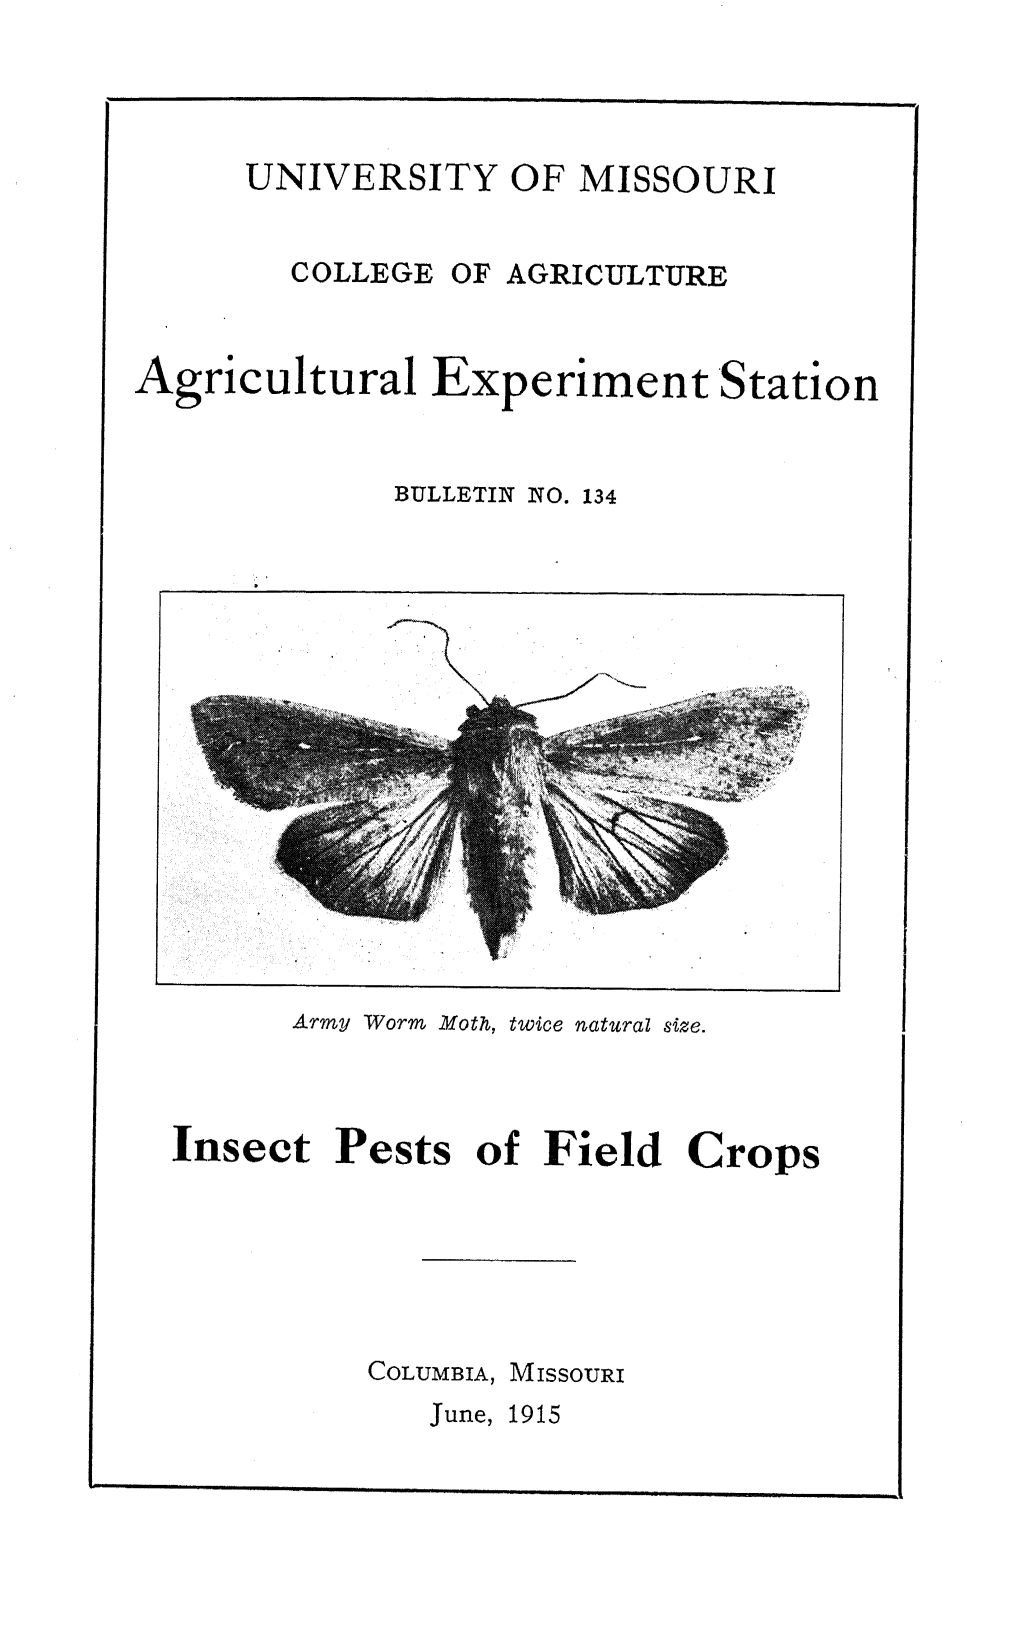 Insect Pests of Field Crops